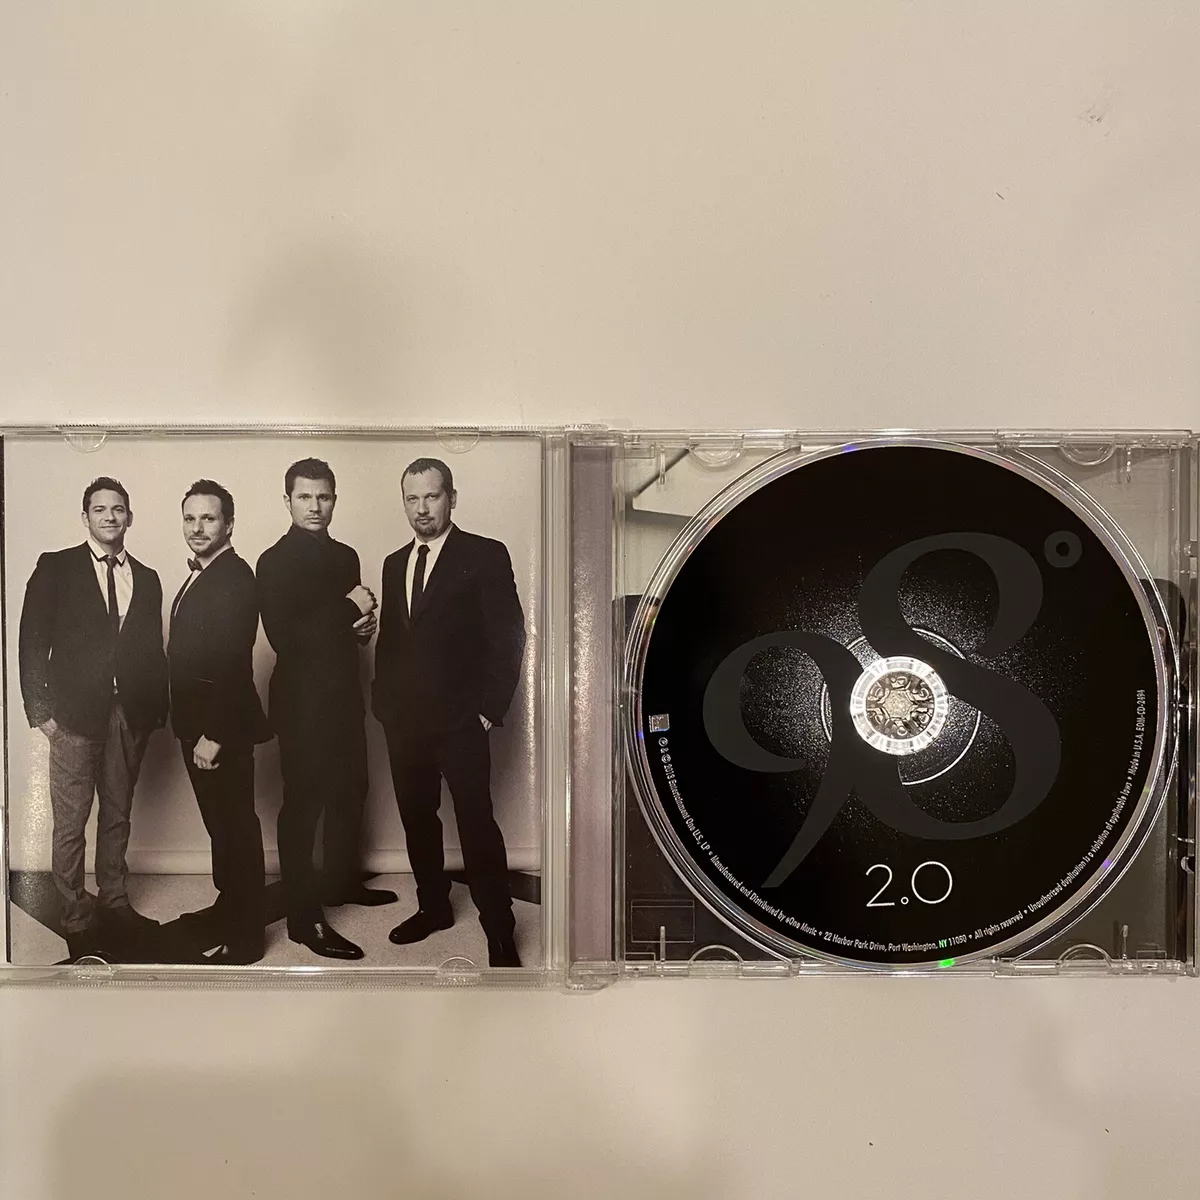 Autographed Signed 98 Degrees - 2.0 - CD